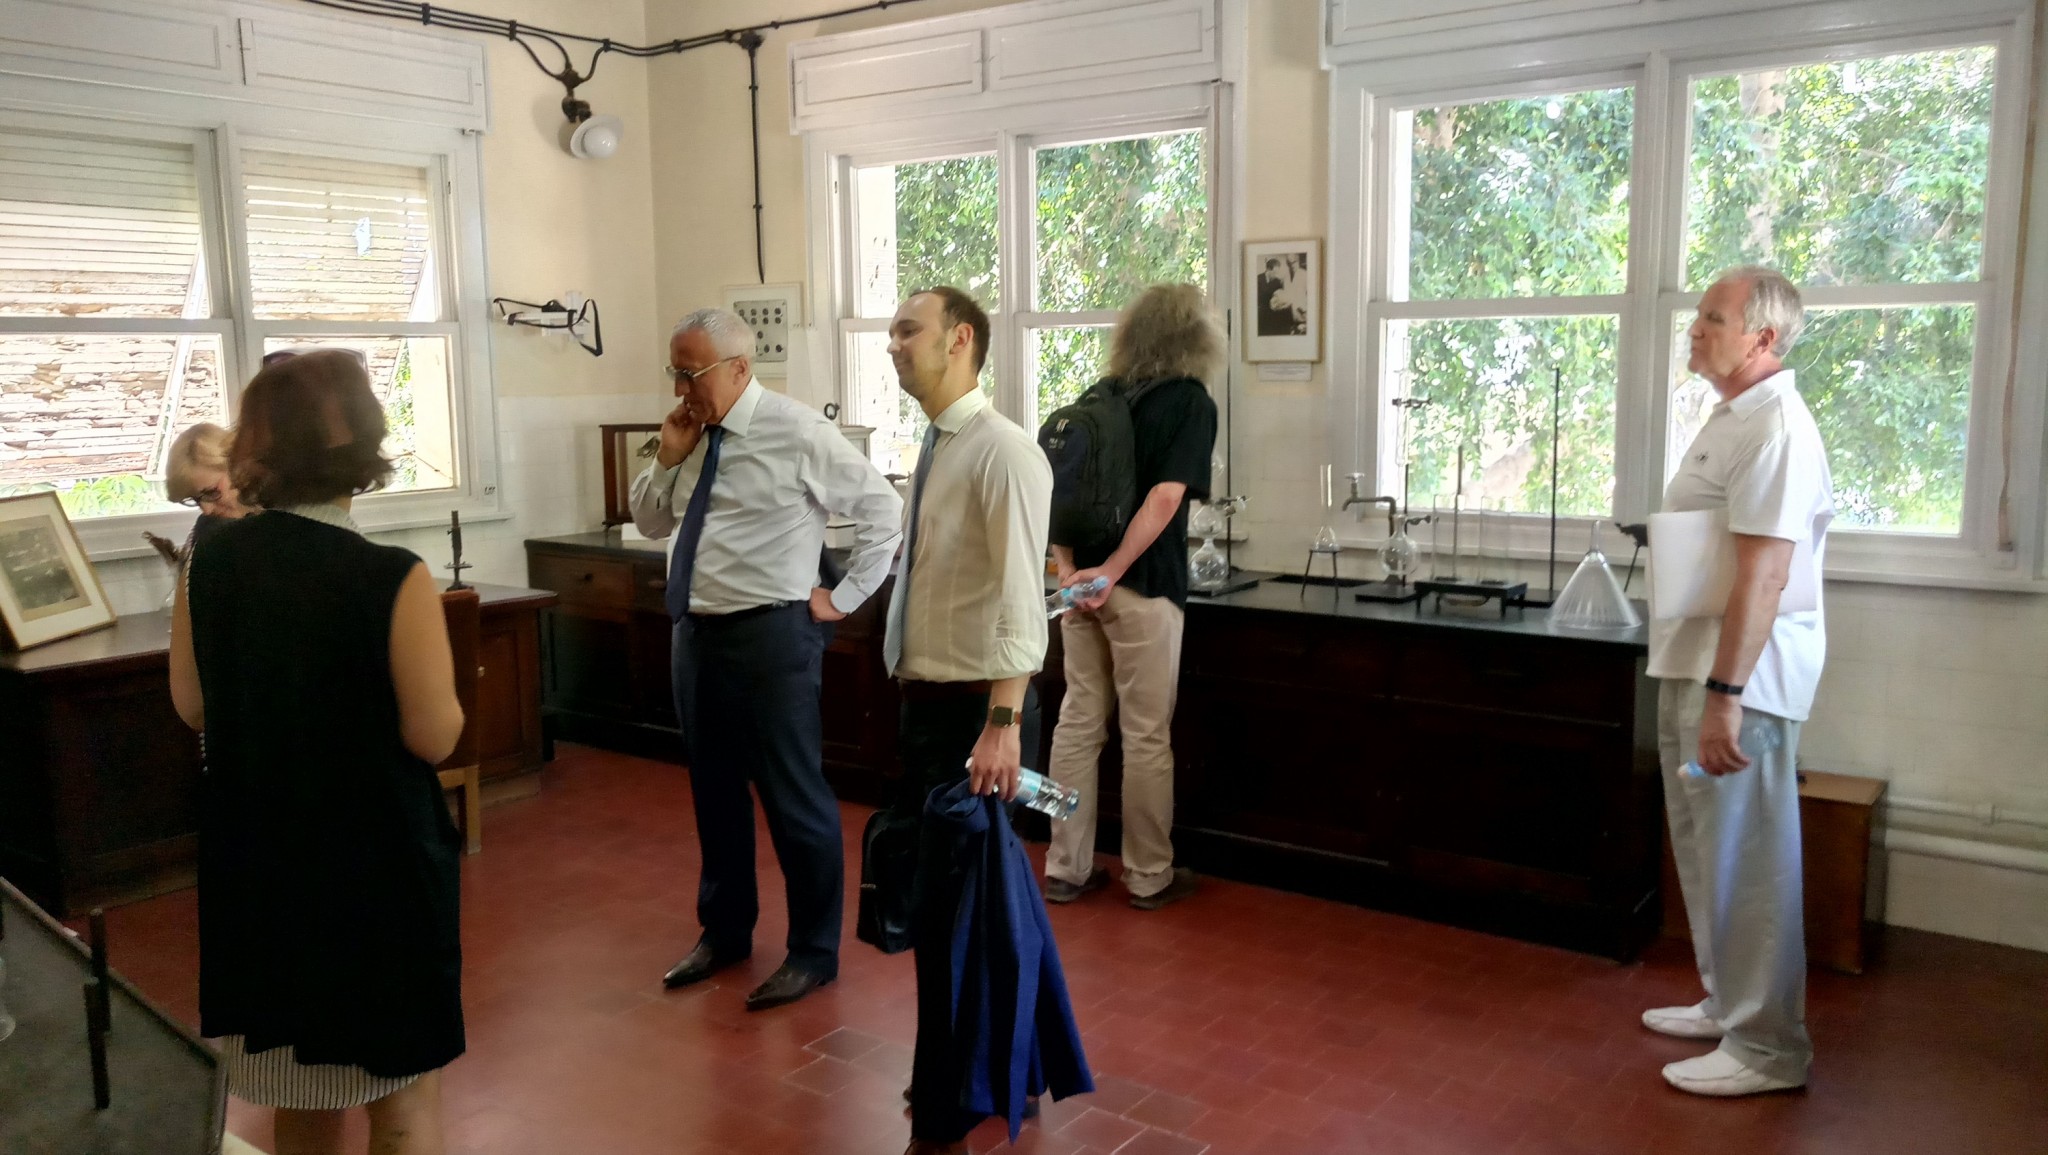 The Skoltech delegation visits the historic laboratory of Chaim Weizmann, the first president of Israel and founder of the Weizmann Institute of Science.